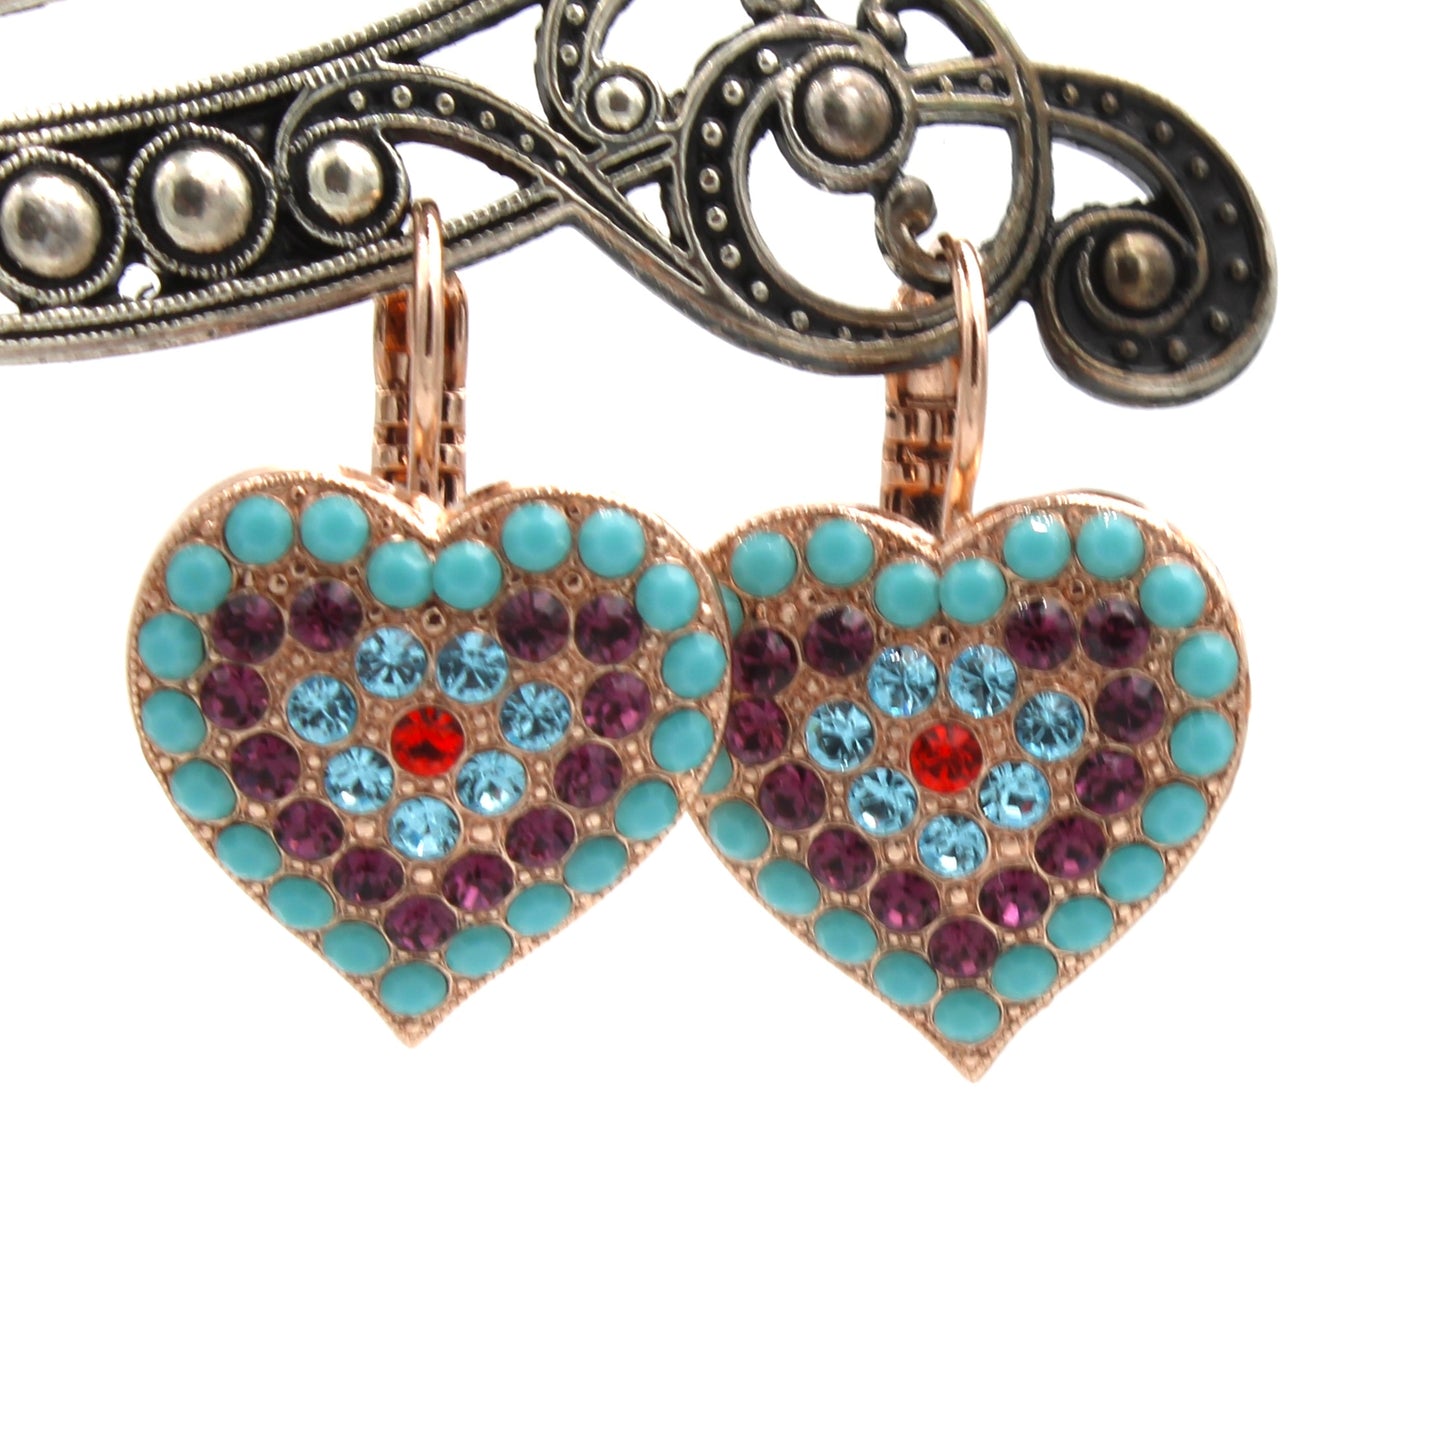 Rainbow Sherbet Collection Heart Earrings in Rose Gold